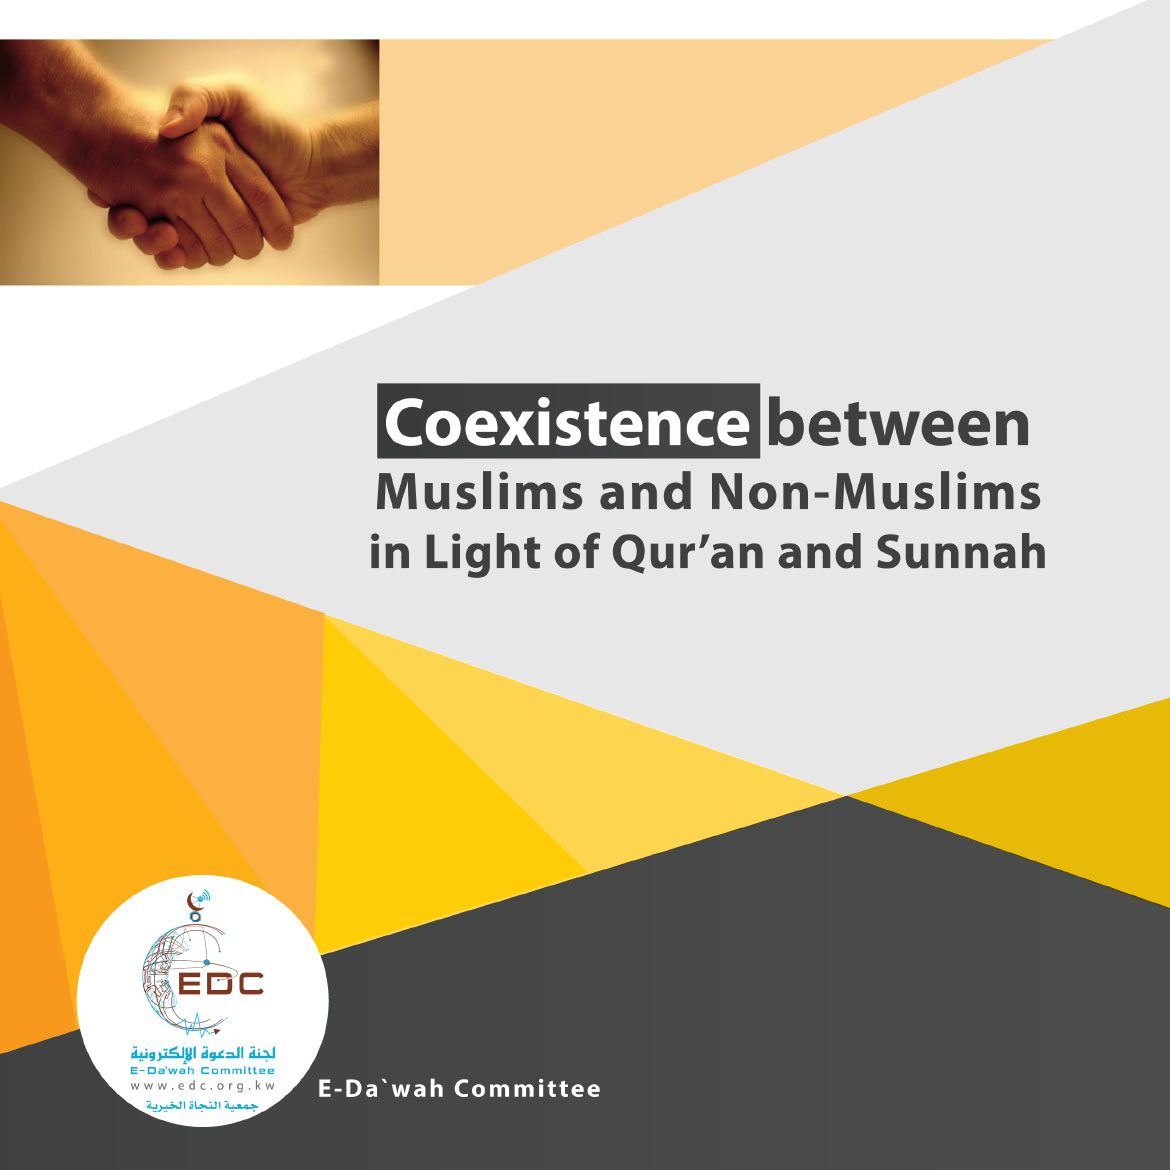 en_Coexistence_between_Muslims_and_Non_Muslims_in_Light_of_Quran_and_Sunnah-1